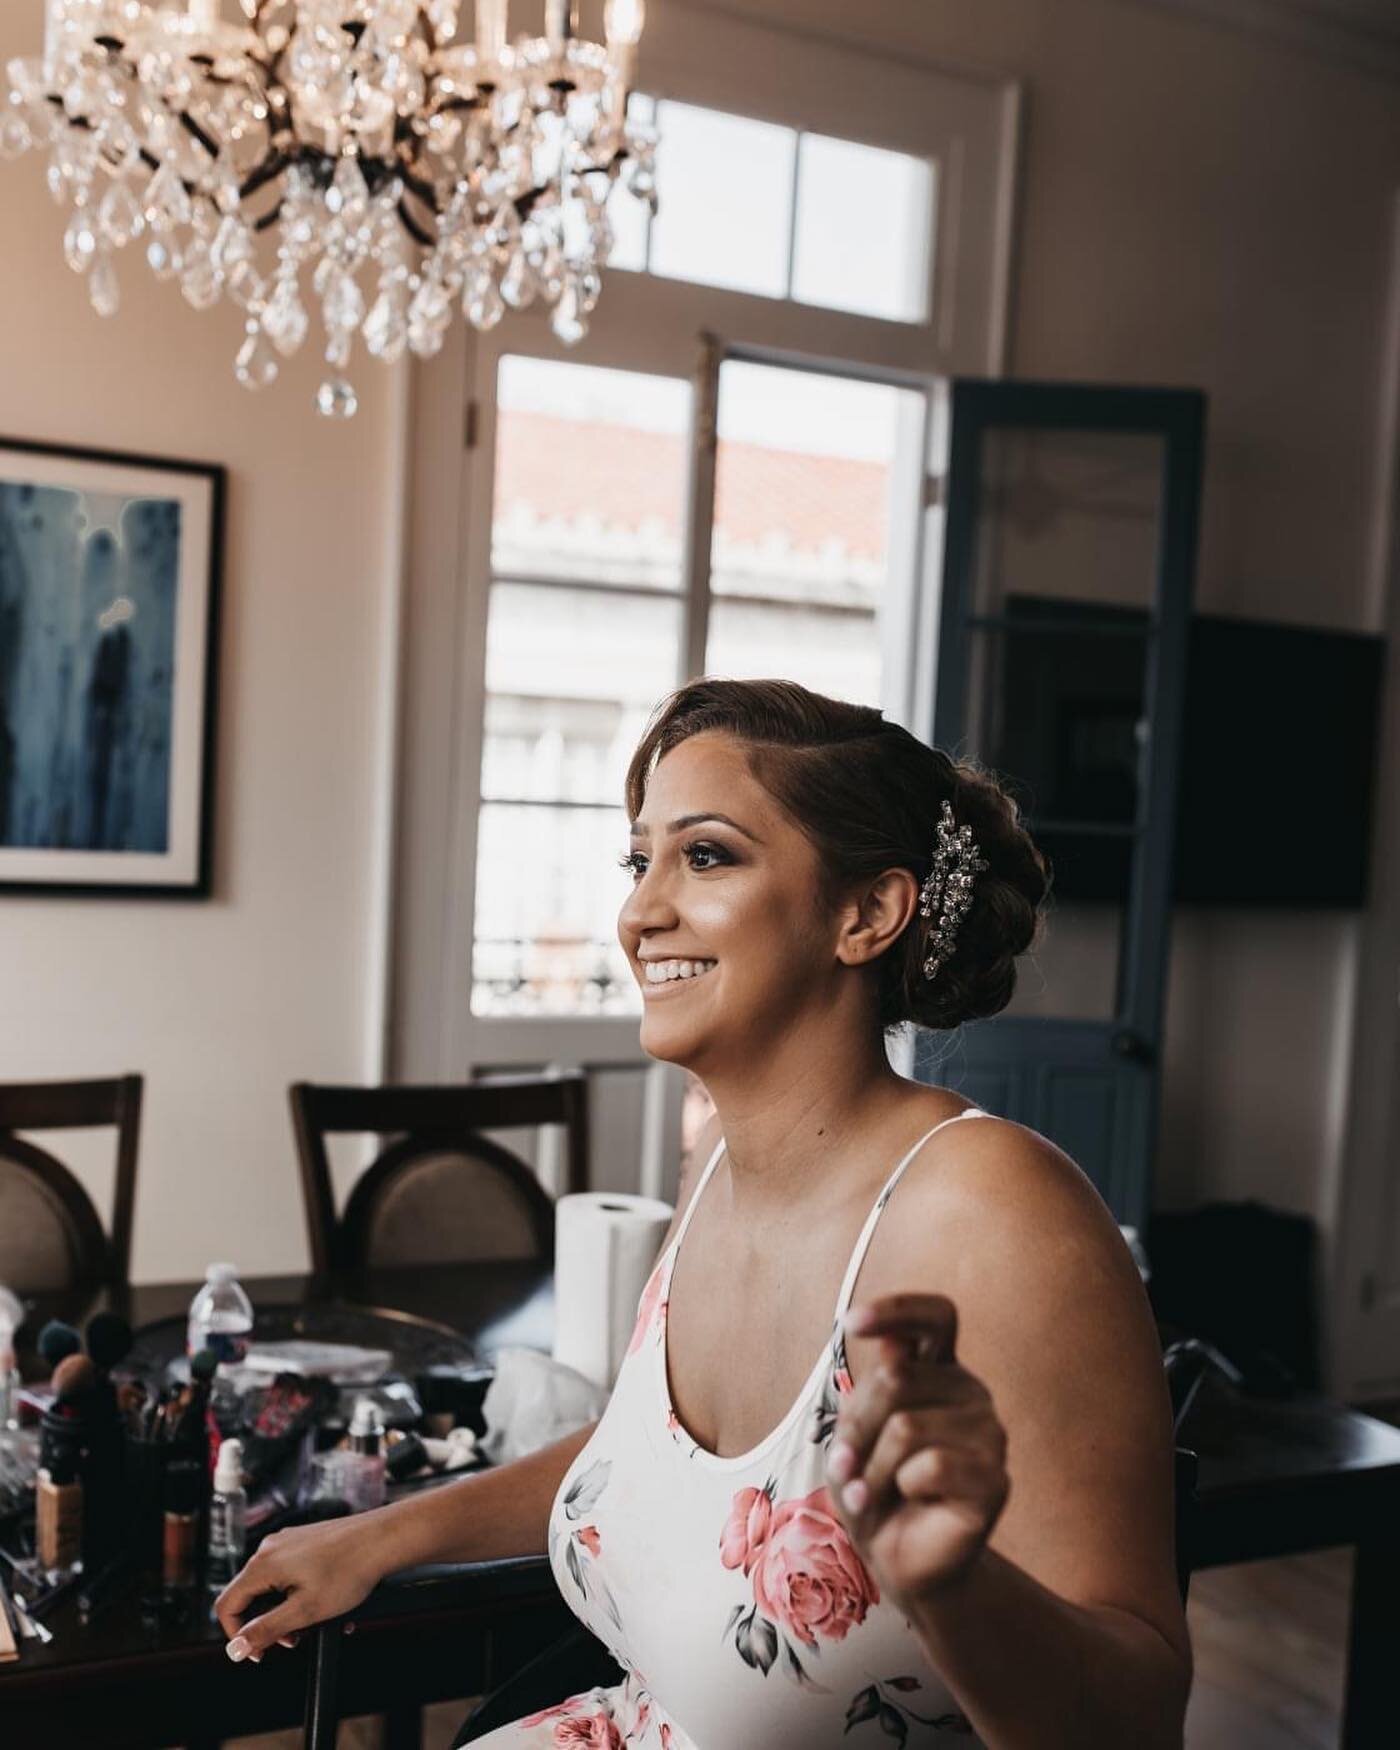 Lights✨ Crystals💎 Magnificence🌟 

We loved being the backdrop for Kristin's gorgeous bridal prep photos. 💐

Whether you're coming to work, relax, or prepare for special memories ahead, let our suites provide all the comfort, joy, amenities (and ba